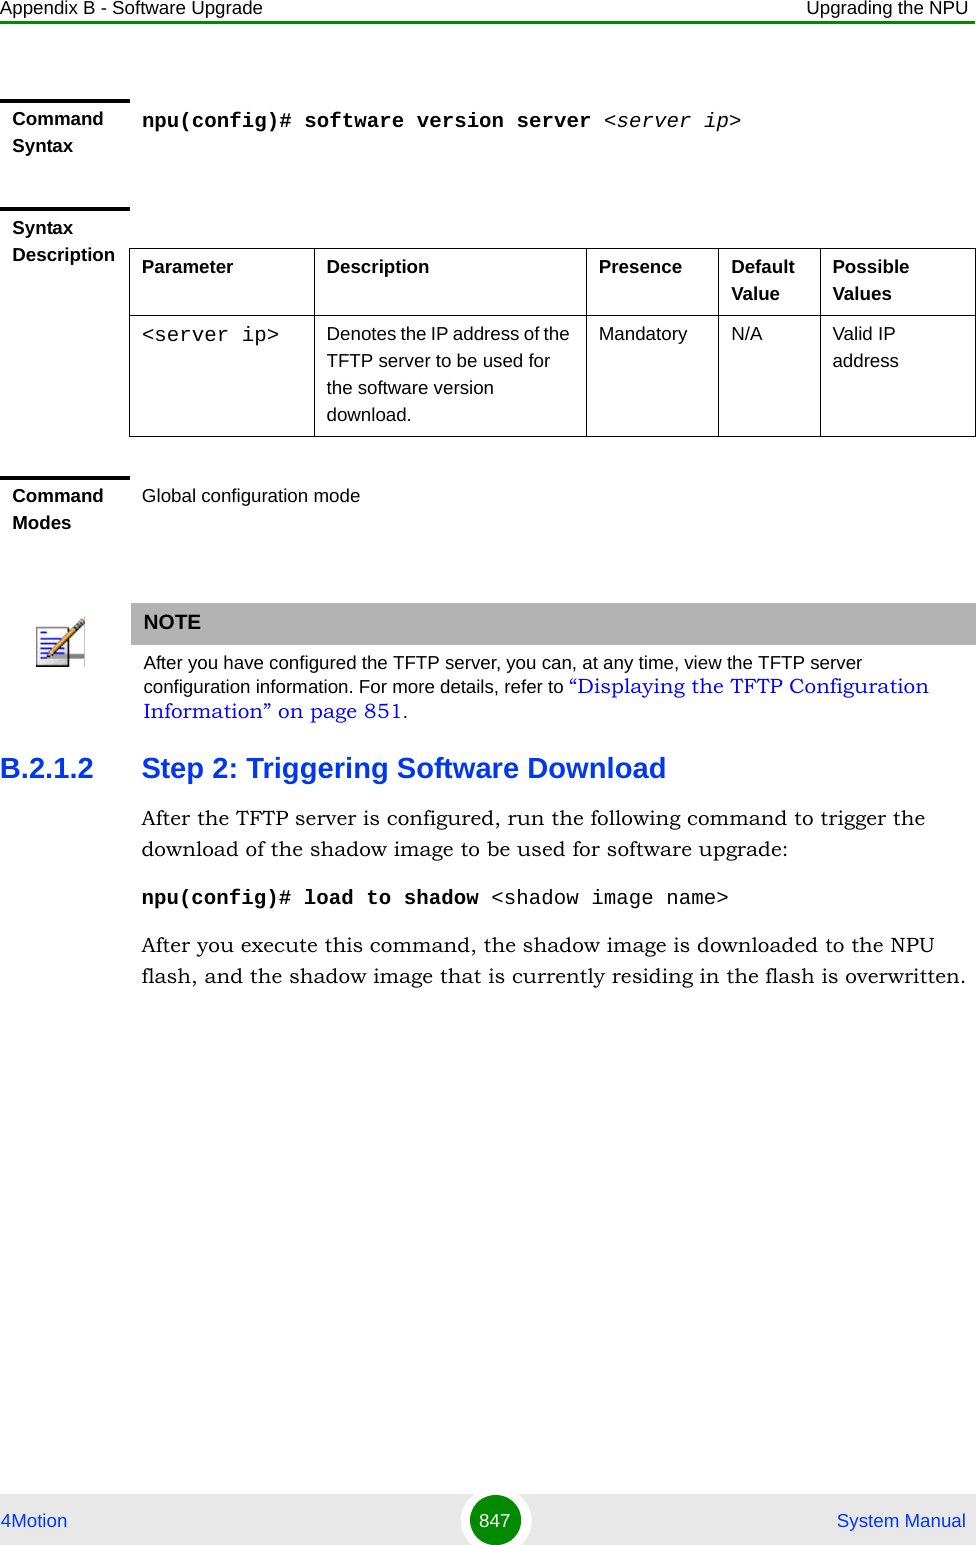 Appendix B - Software Upgrade Upgrading the NPU4Motion 847  System ManualB.2.1.2 Step 2: Triggering Software DownloadAfter the TFTP server is configured, run the following command to trigger the download of the shadow image to be used for software upgrade:npu(config)# load to shadow &lt;shadow image name&gt;After you execute this command, the shadow image is downloaded to the NPU flash, and the shadow image that is currently residing in the flash is overwritten.Command Syntaxnpu(config)# software version server &lt;server ip&gt;Syntax Description Parameter Description Presence Default ValuePossible Values&lt;server ip&gt; Denotes the IP address of the TFTP server to be used for the software version download.Mandatory N/A Valid IP addressCommand ModesGlobal configuration modeNOTEAfter you have configured the TFTP server, you can, at any time, view the TFTP server configuration information. For more details, refer to “Displaying the TFTP Configuration Information” on page 851. 